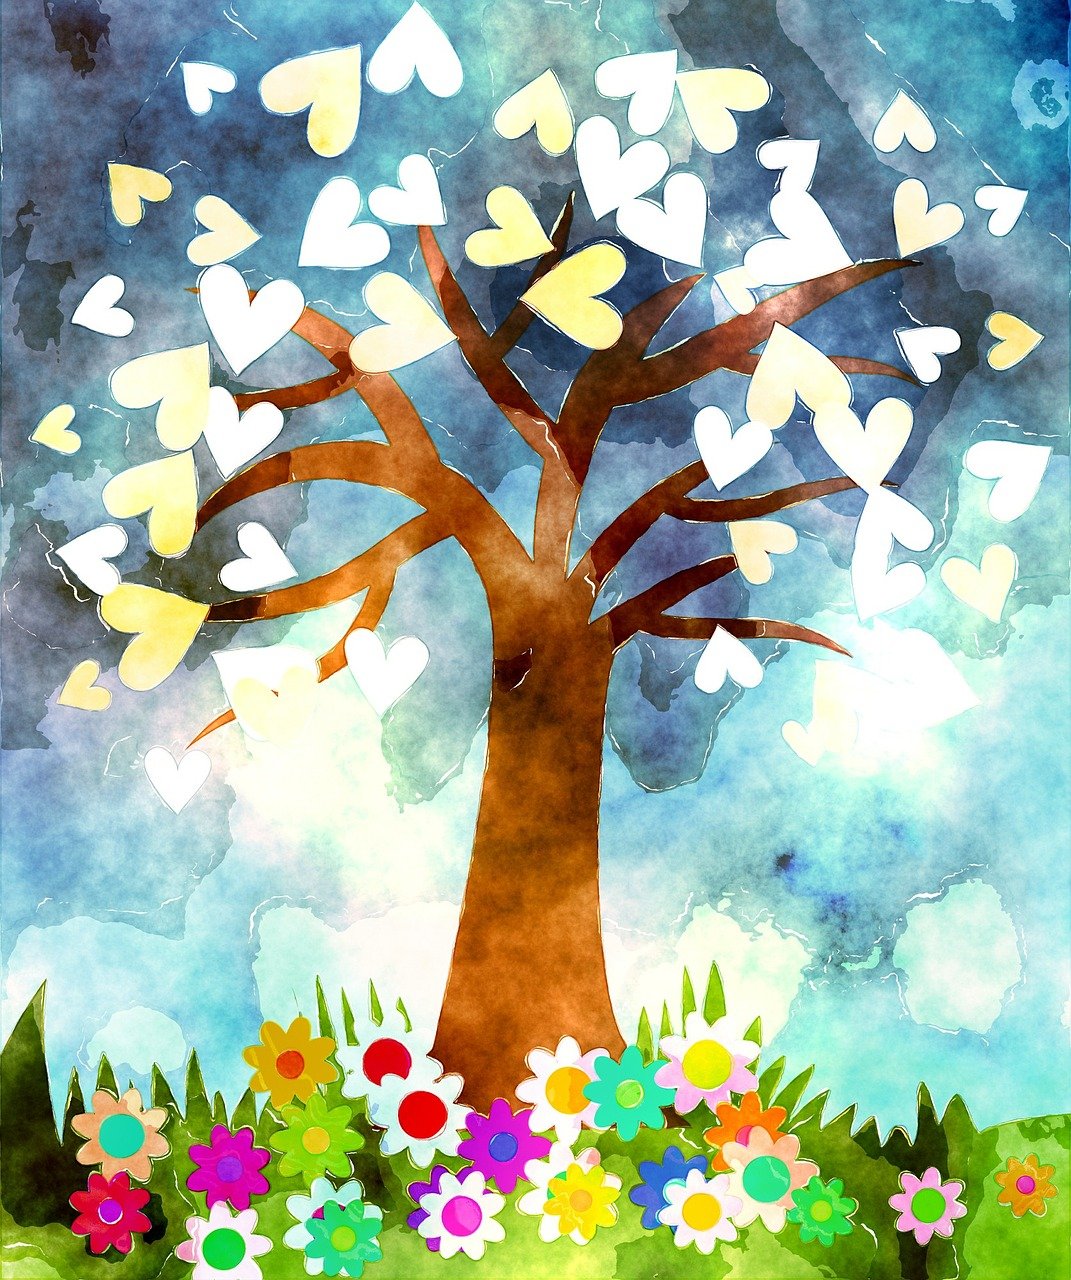 a painting of a tree with hearts on it, a watercolor painting, inspired by Aaron Douglas, trending on pixabay, cheerful atmosphere, 中 元 节, half image, istock